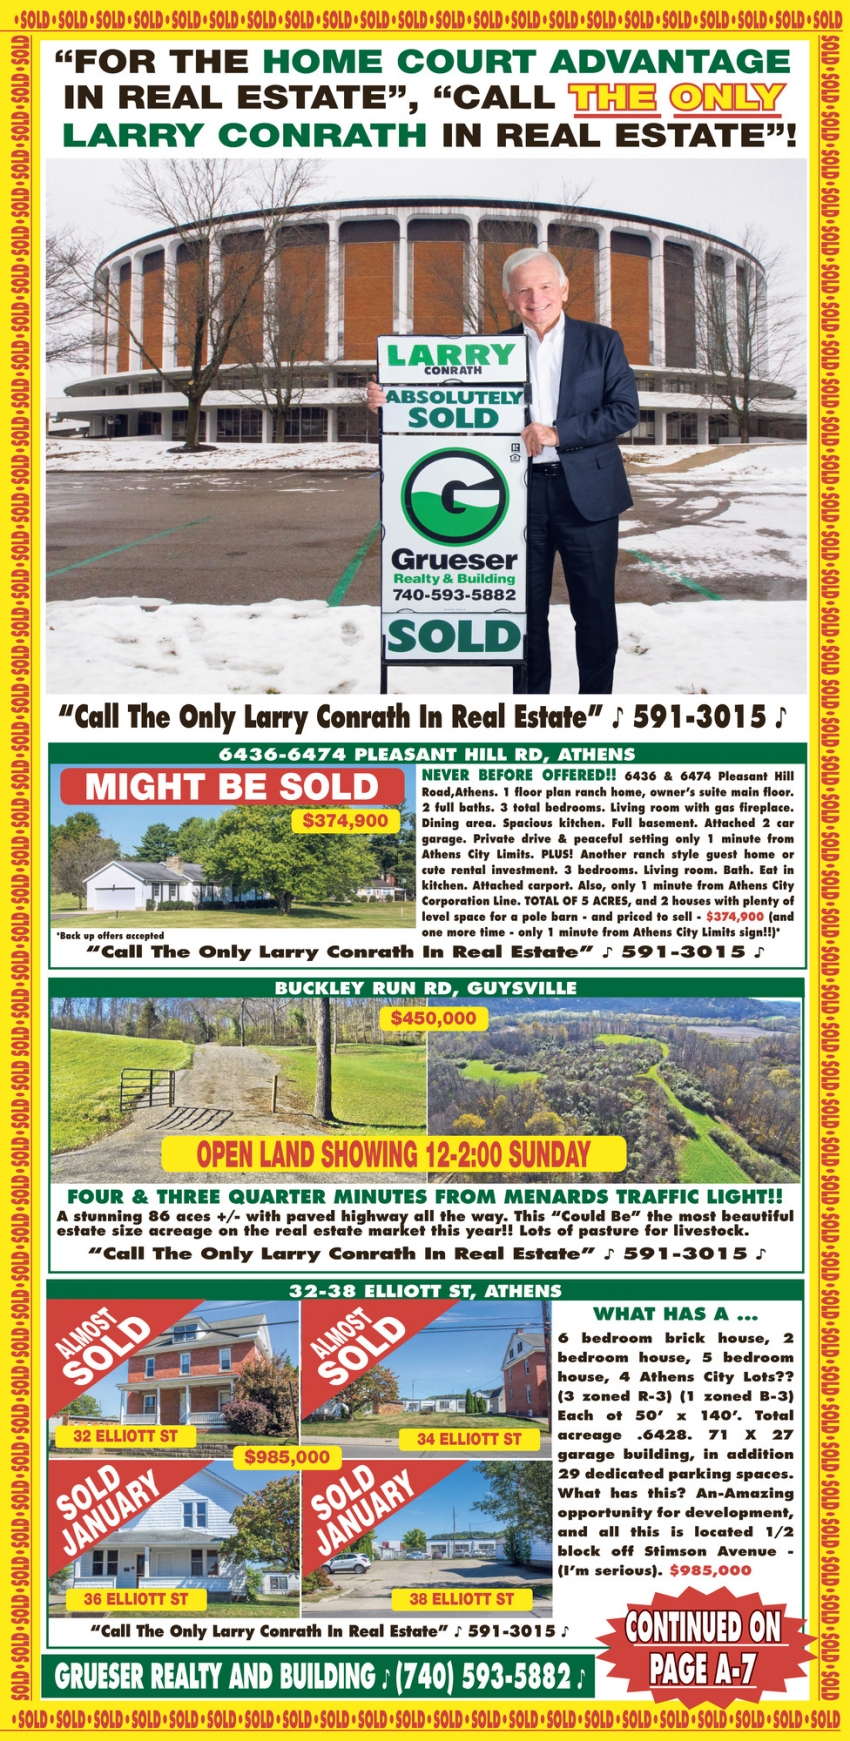 Call the Only Larry Conrath in Real Estate!